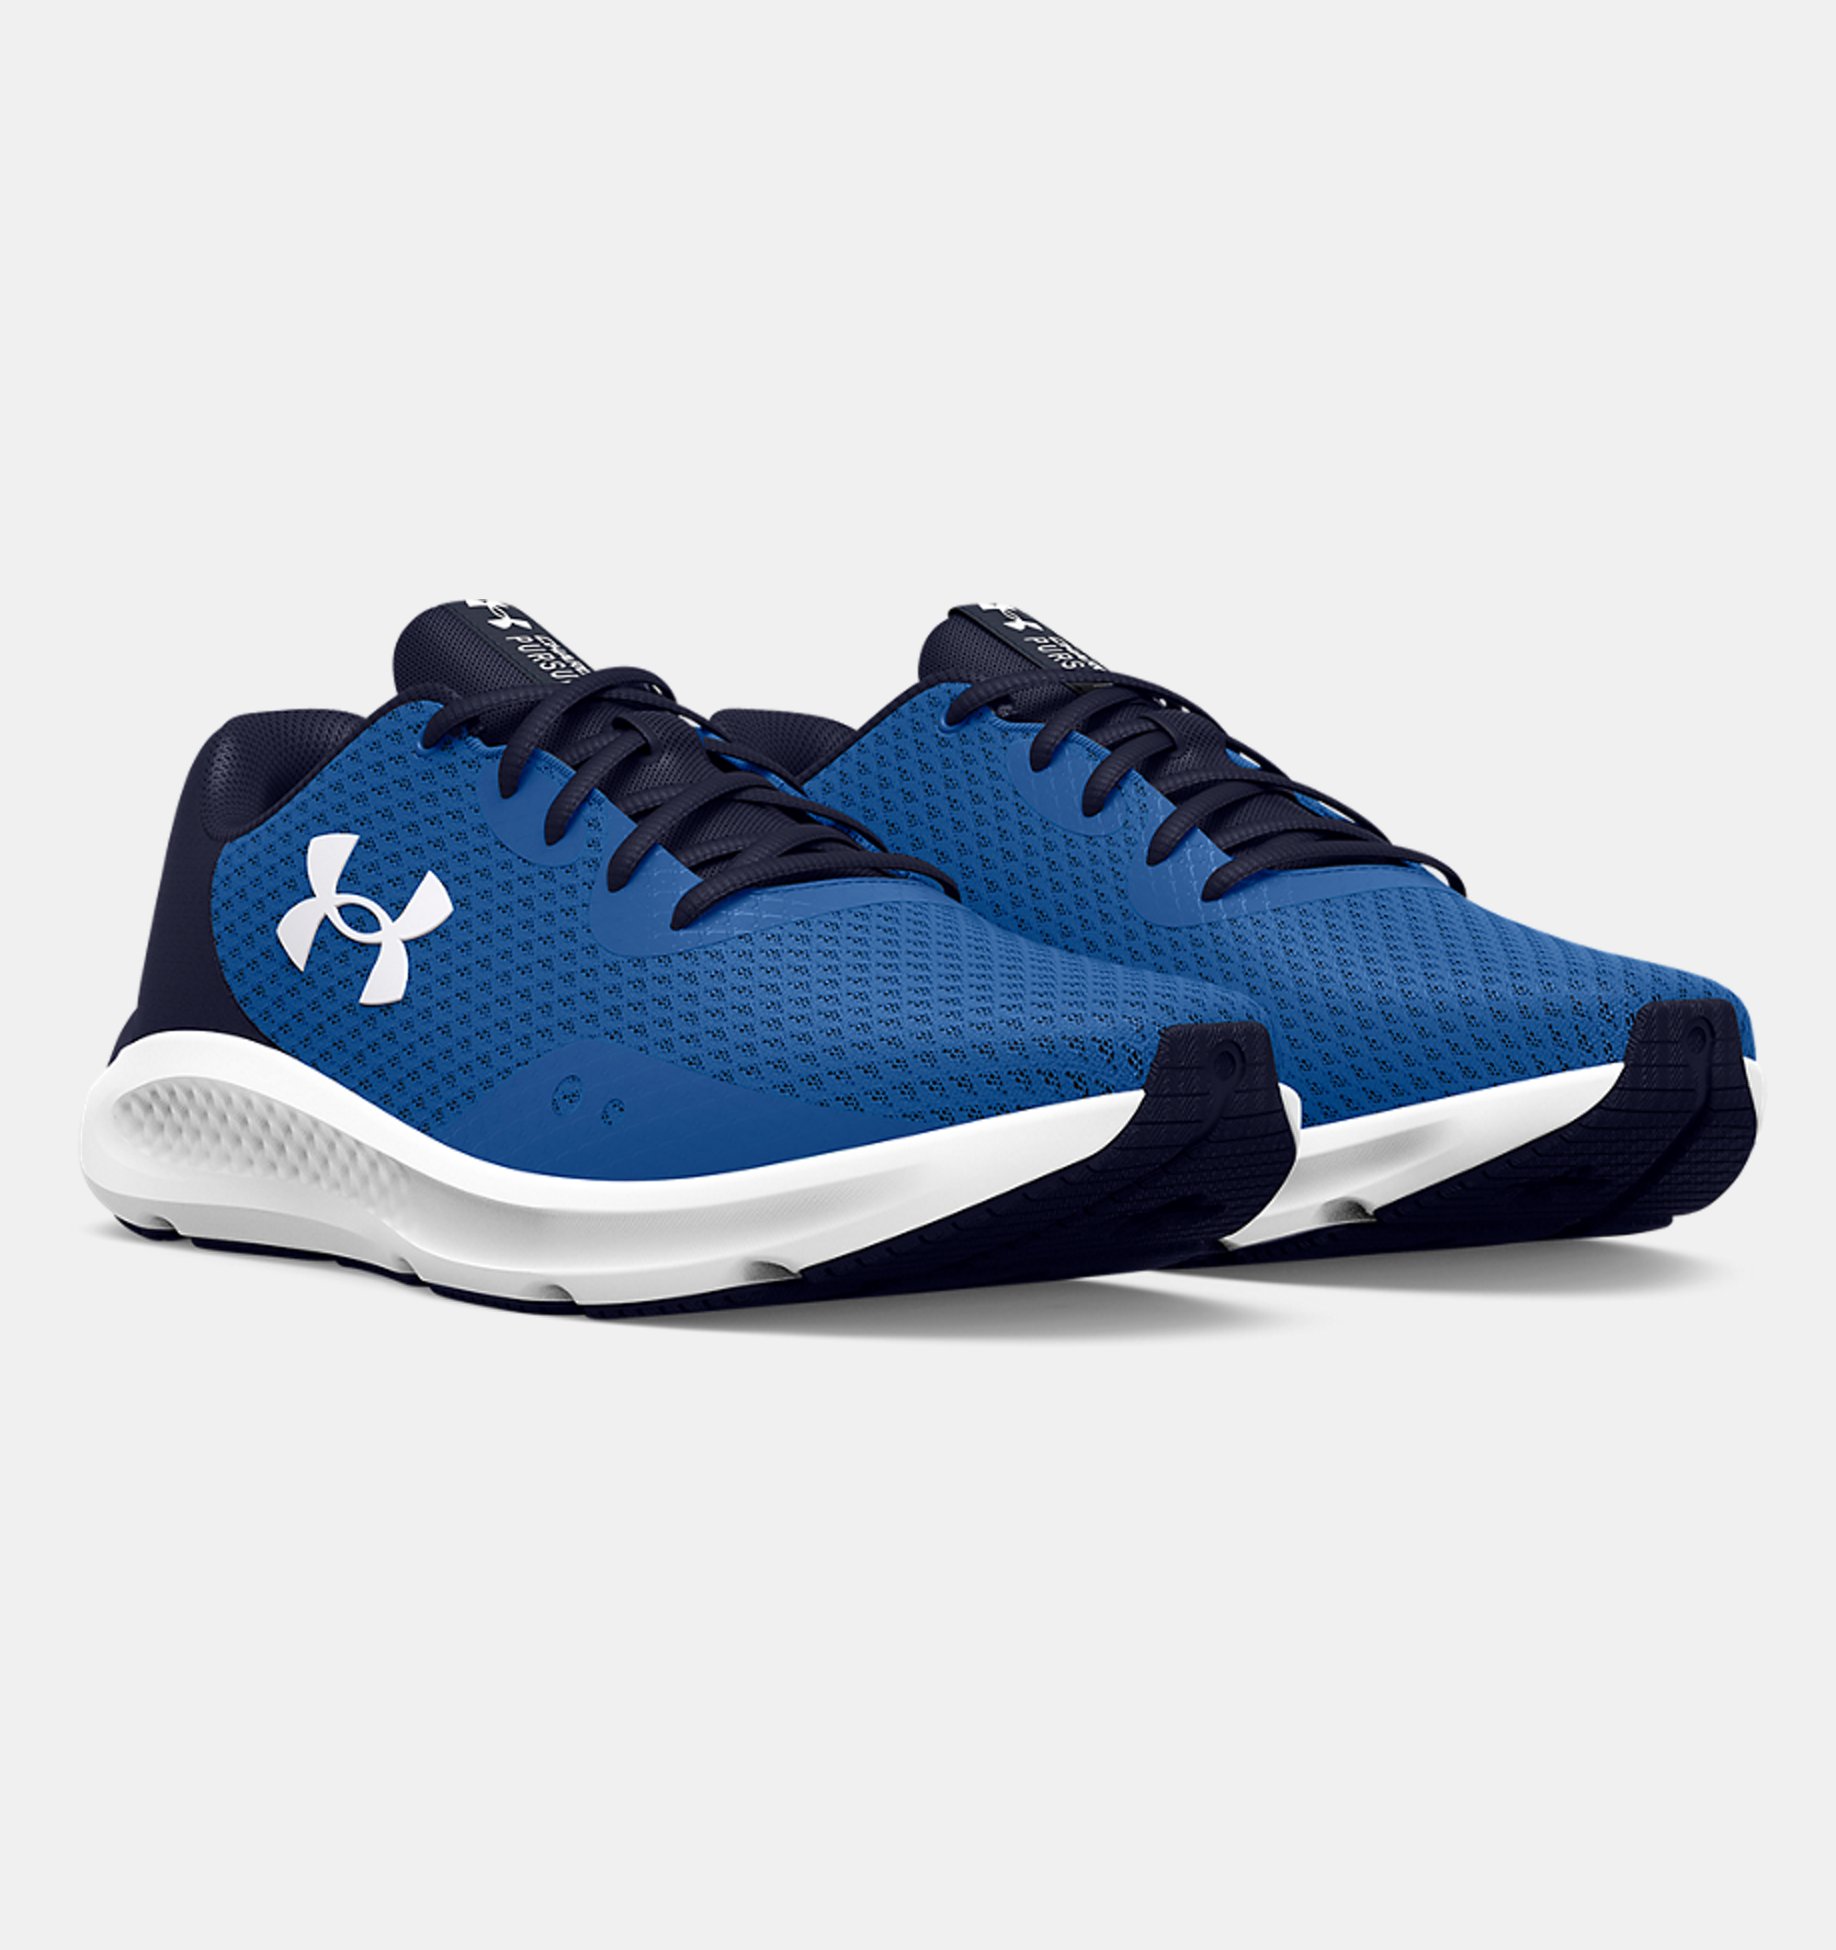 Under Armour Zapatillas Running Hombre Charged Pursuit 3 gris